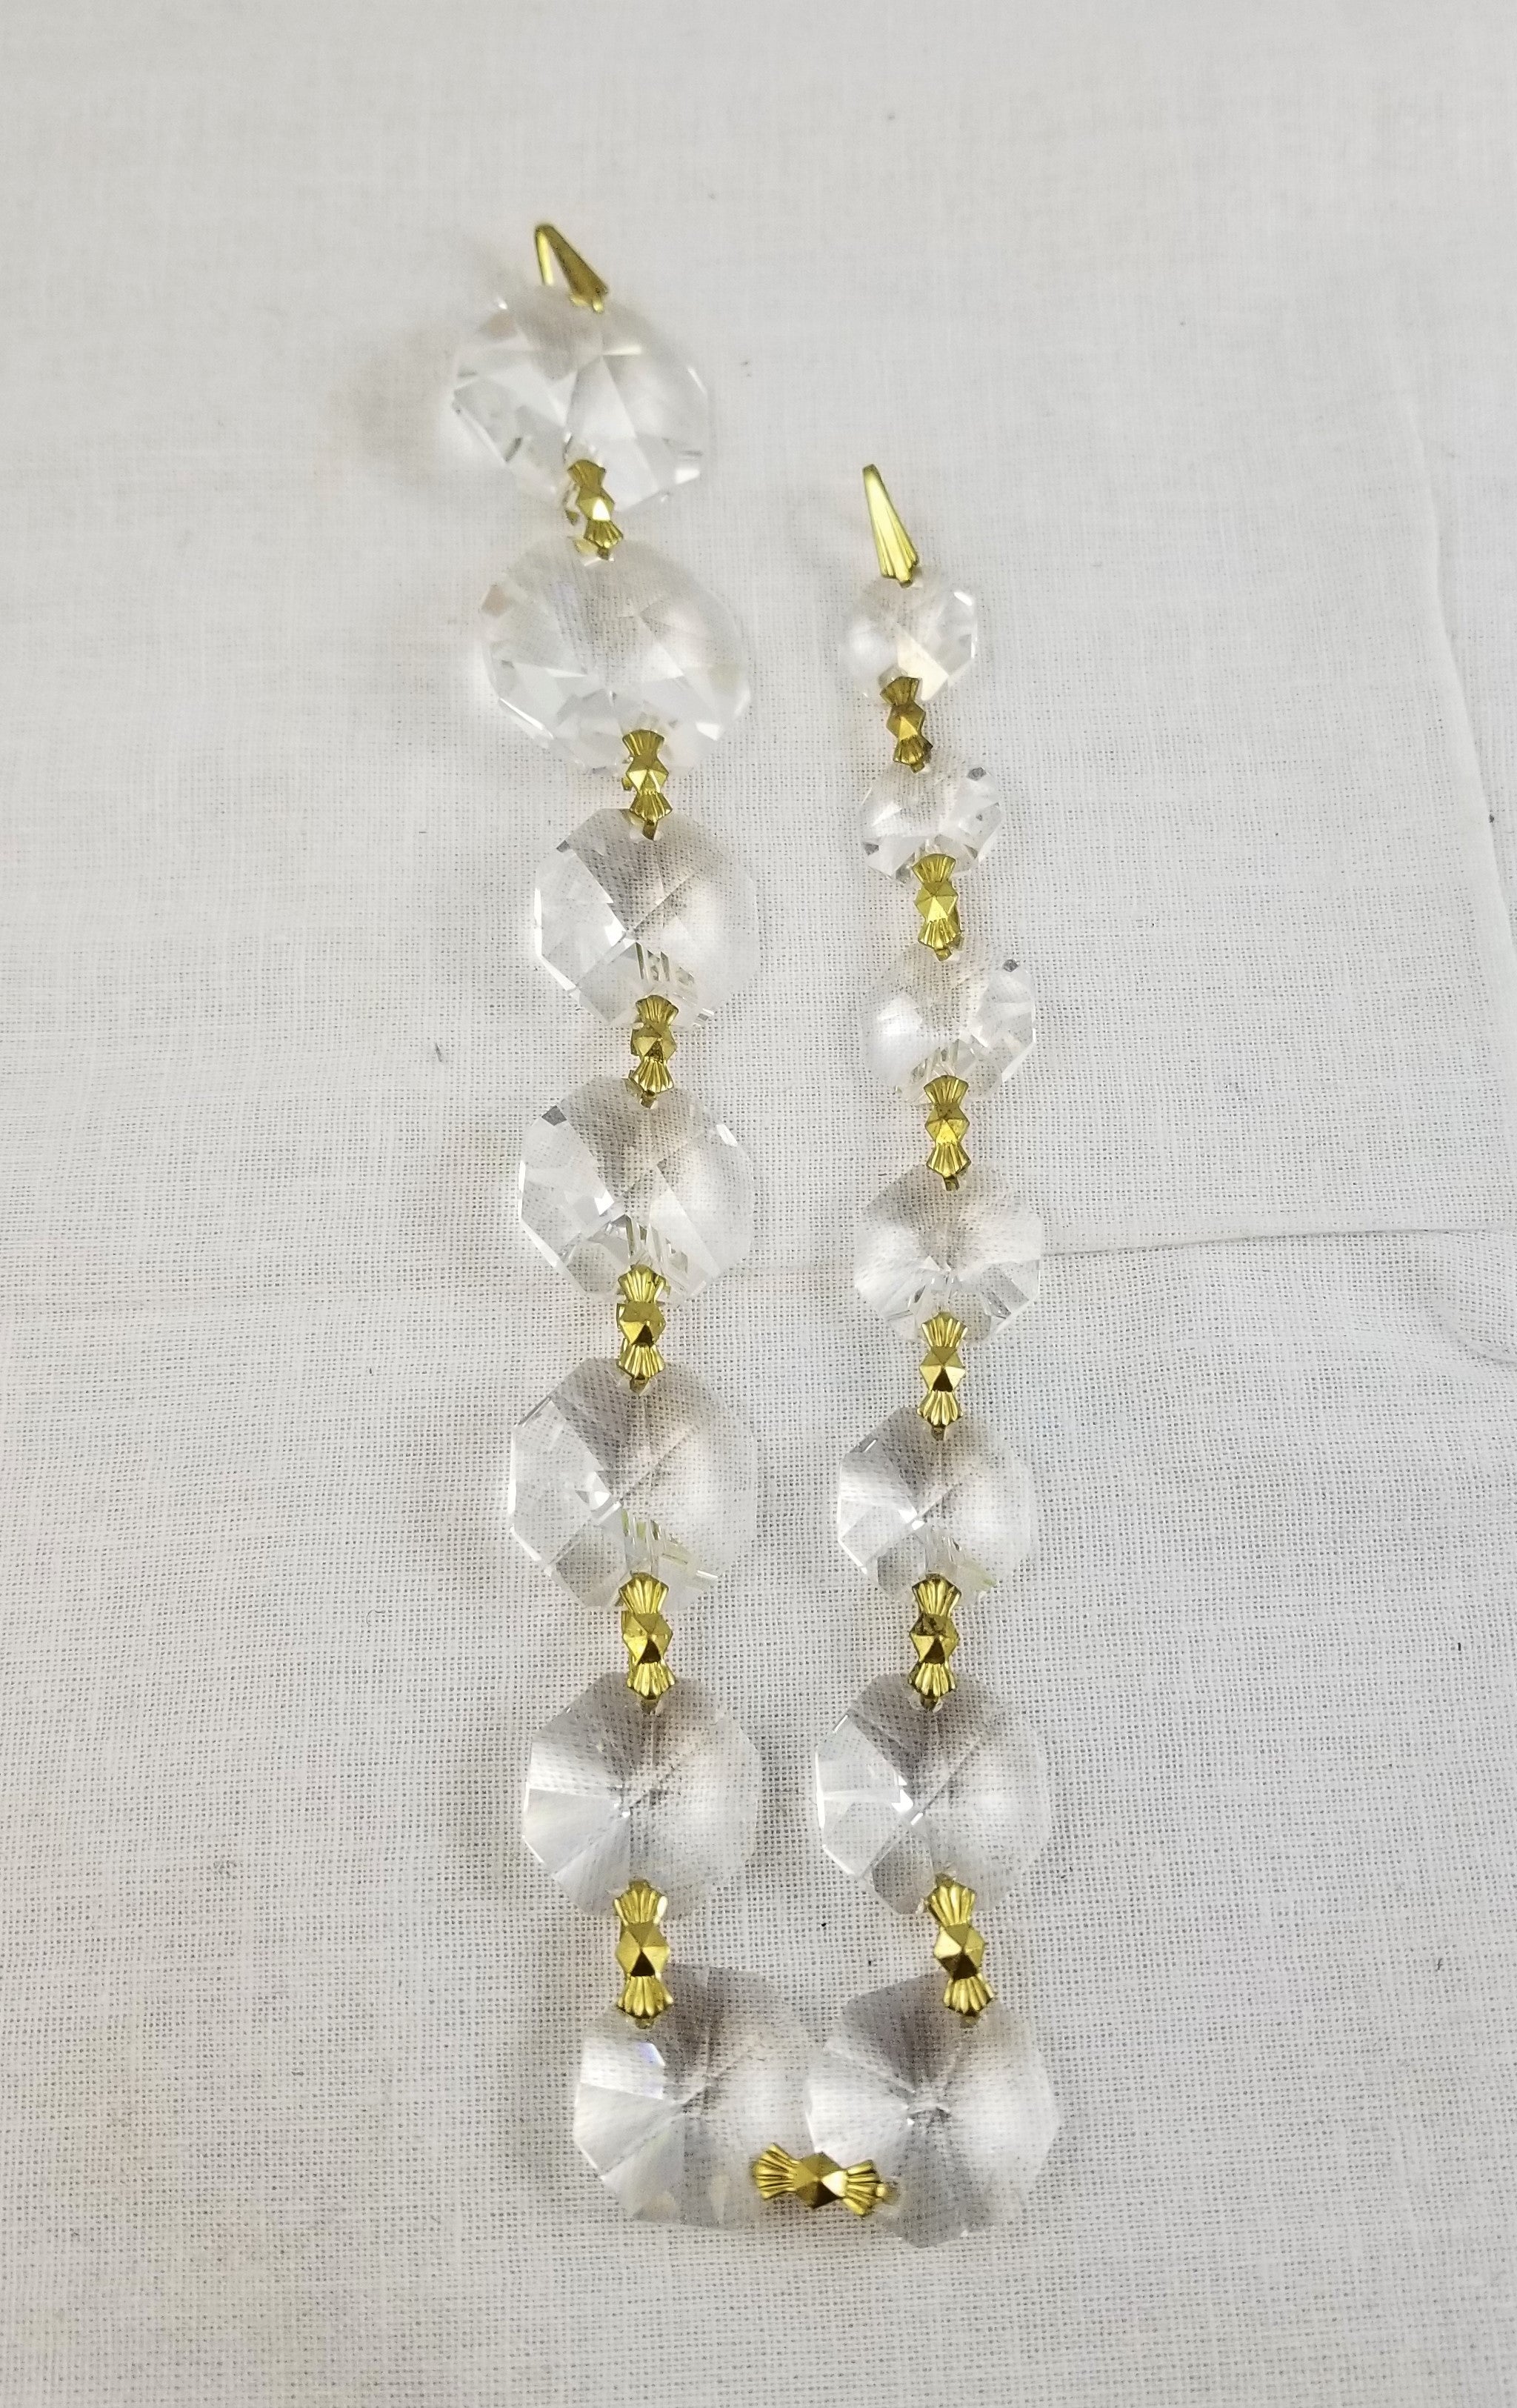 Strass Jewels - 7" Crystal Graduated Beads with Brass Bowtie Pins